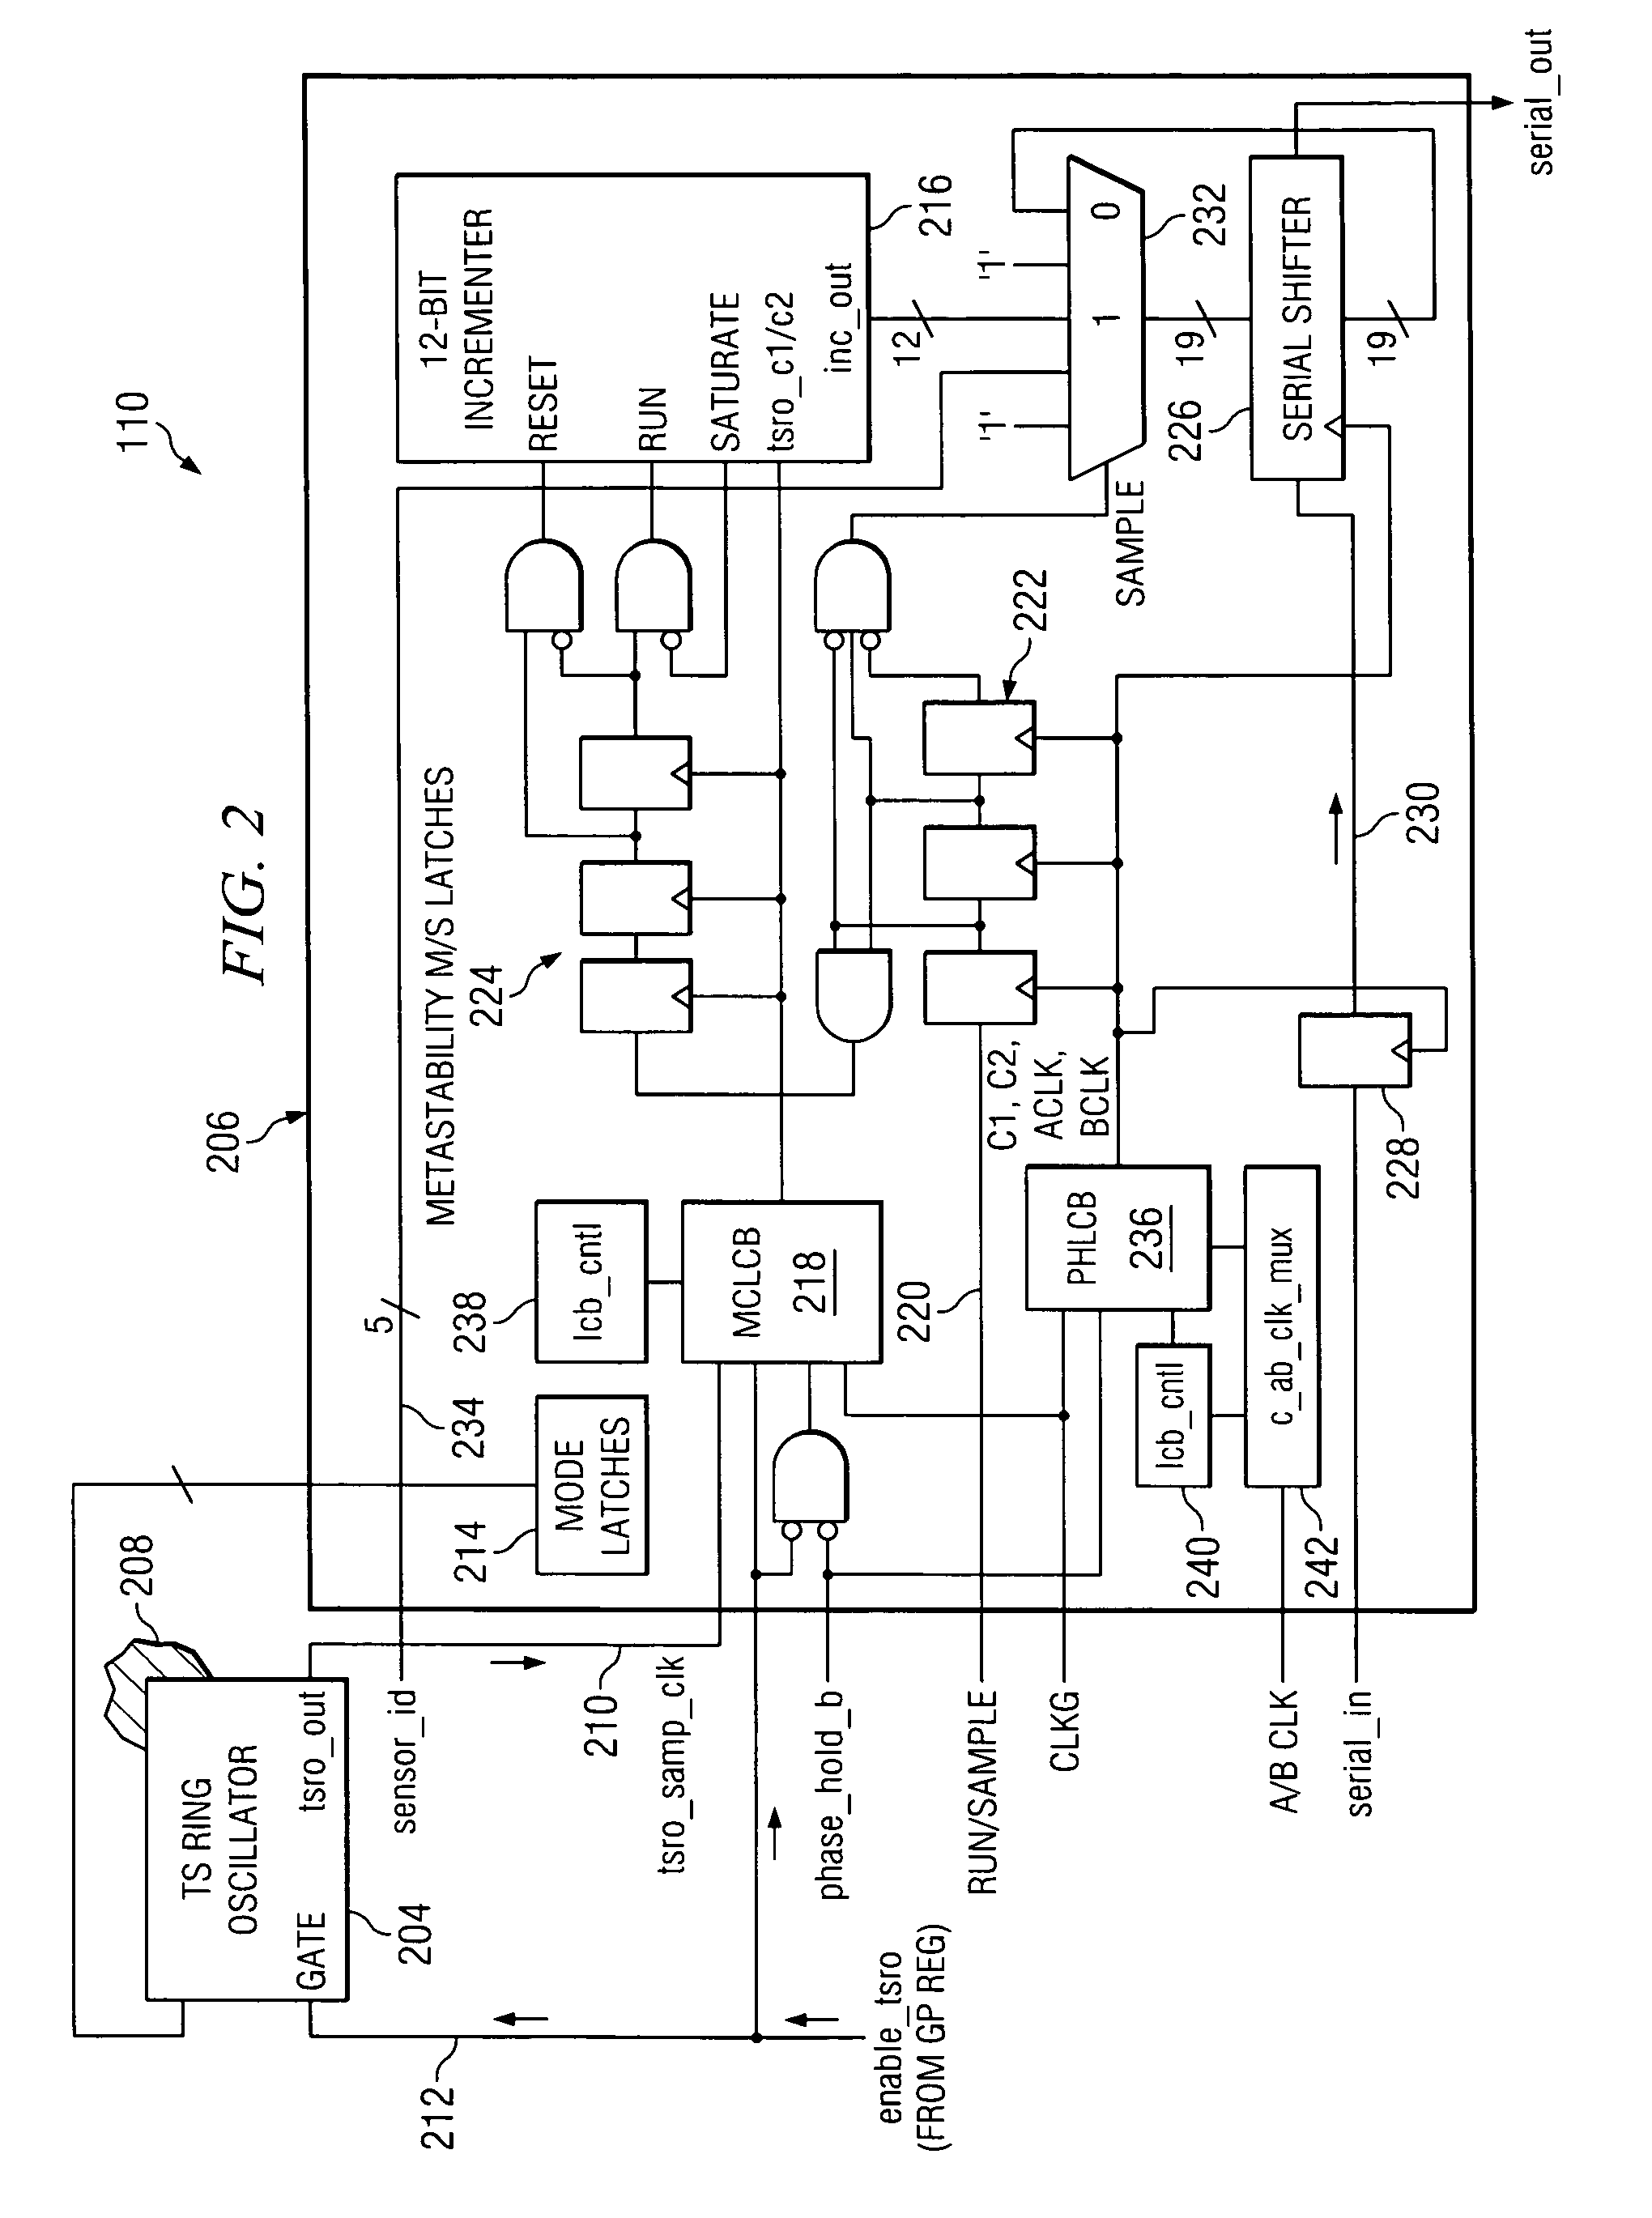 System and method for thermal monitoring of IC using sampling periods of invariant duration